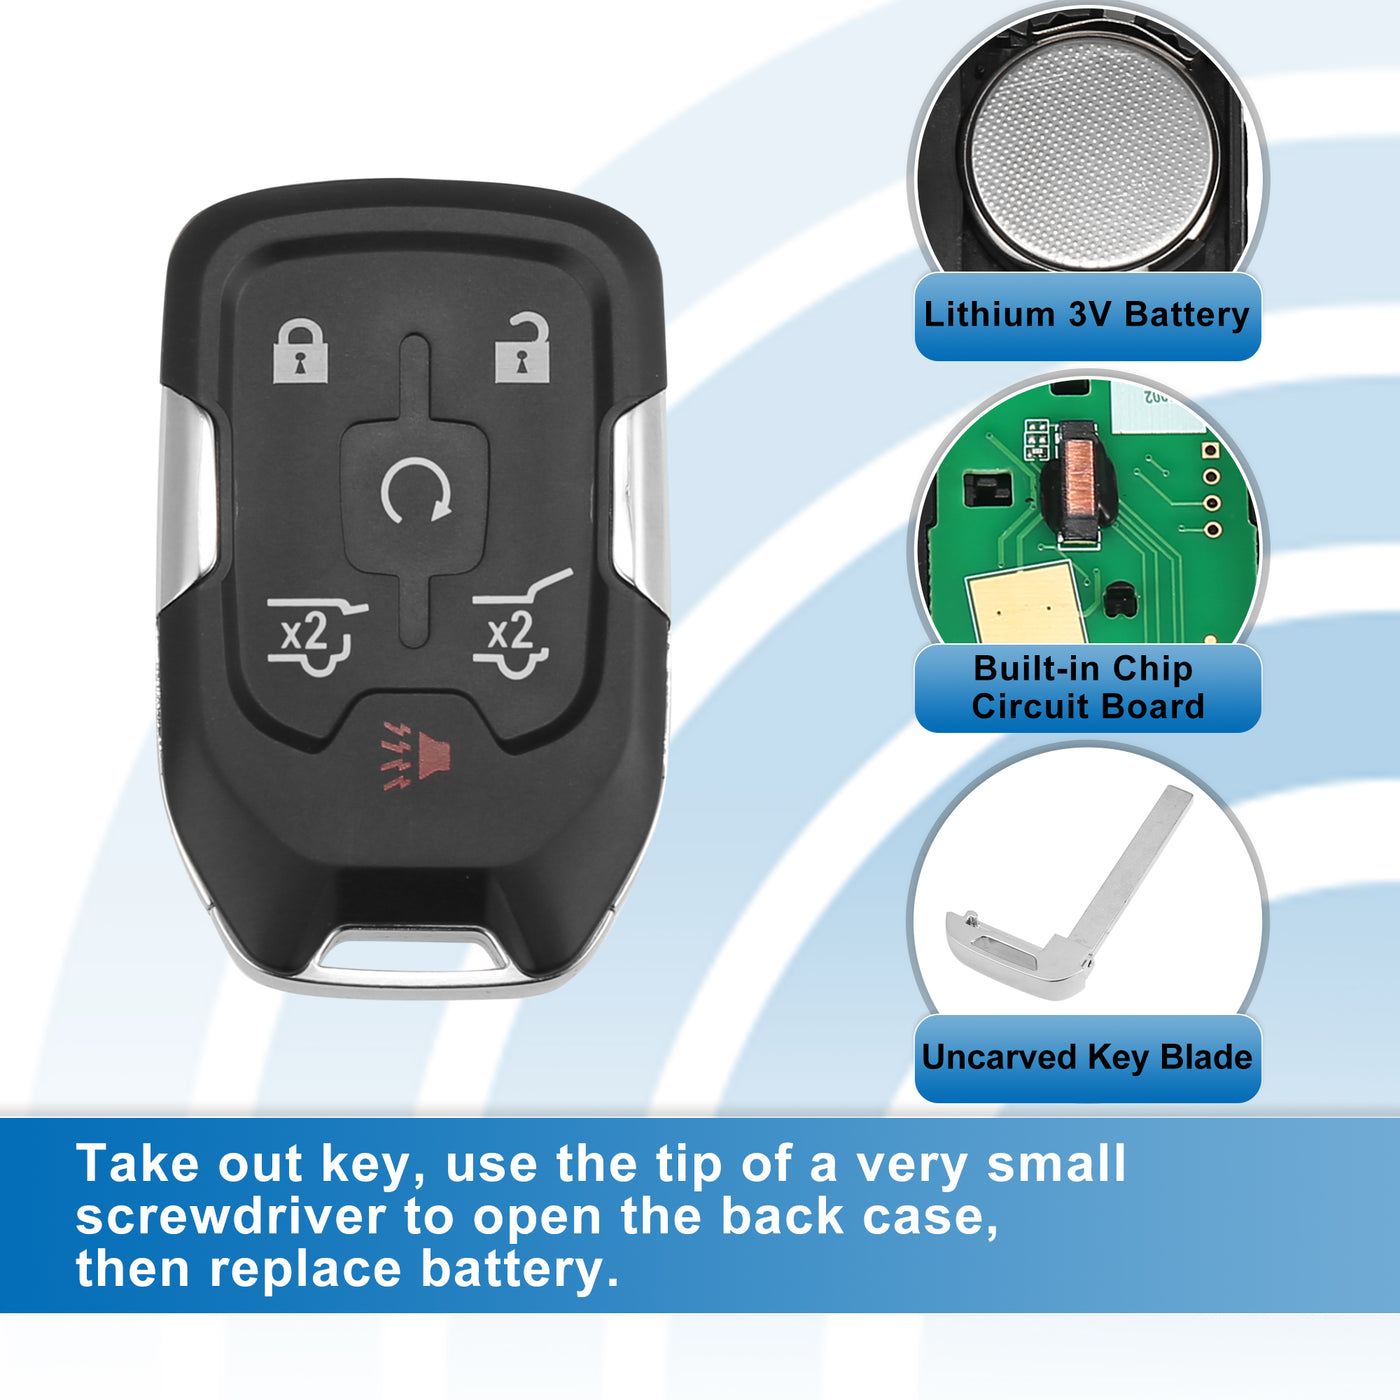 X AUTOHAUX 6 Button Car Keyless Entry Remote Control Replacement Key Fob Proximity Smart Fob HYQ1EA for Chevy Tahoe 2015-2020 433MHz 46 Chip